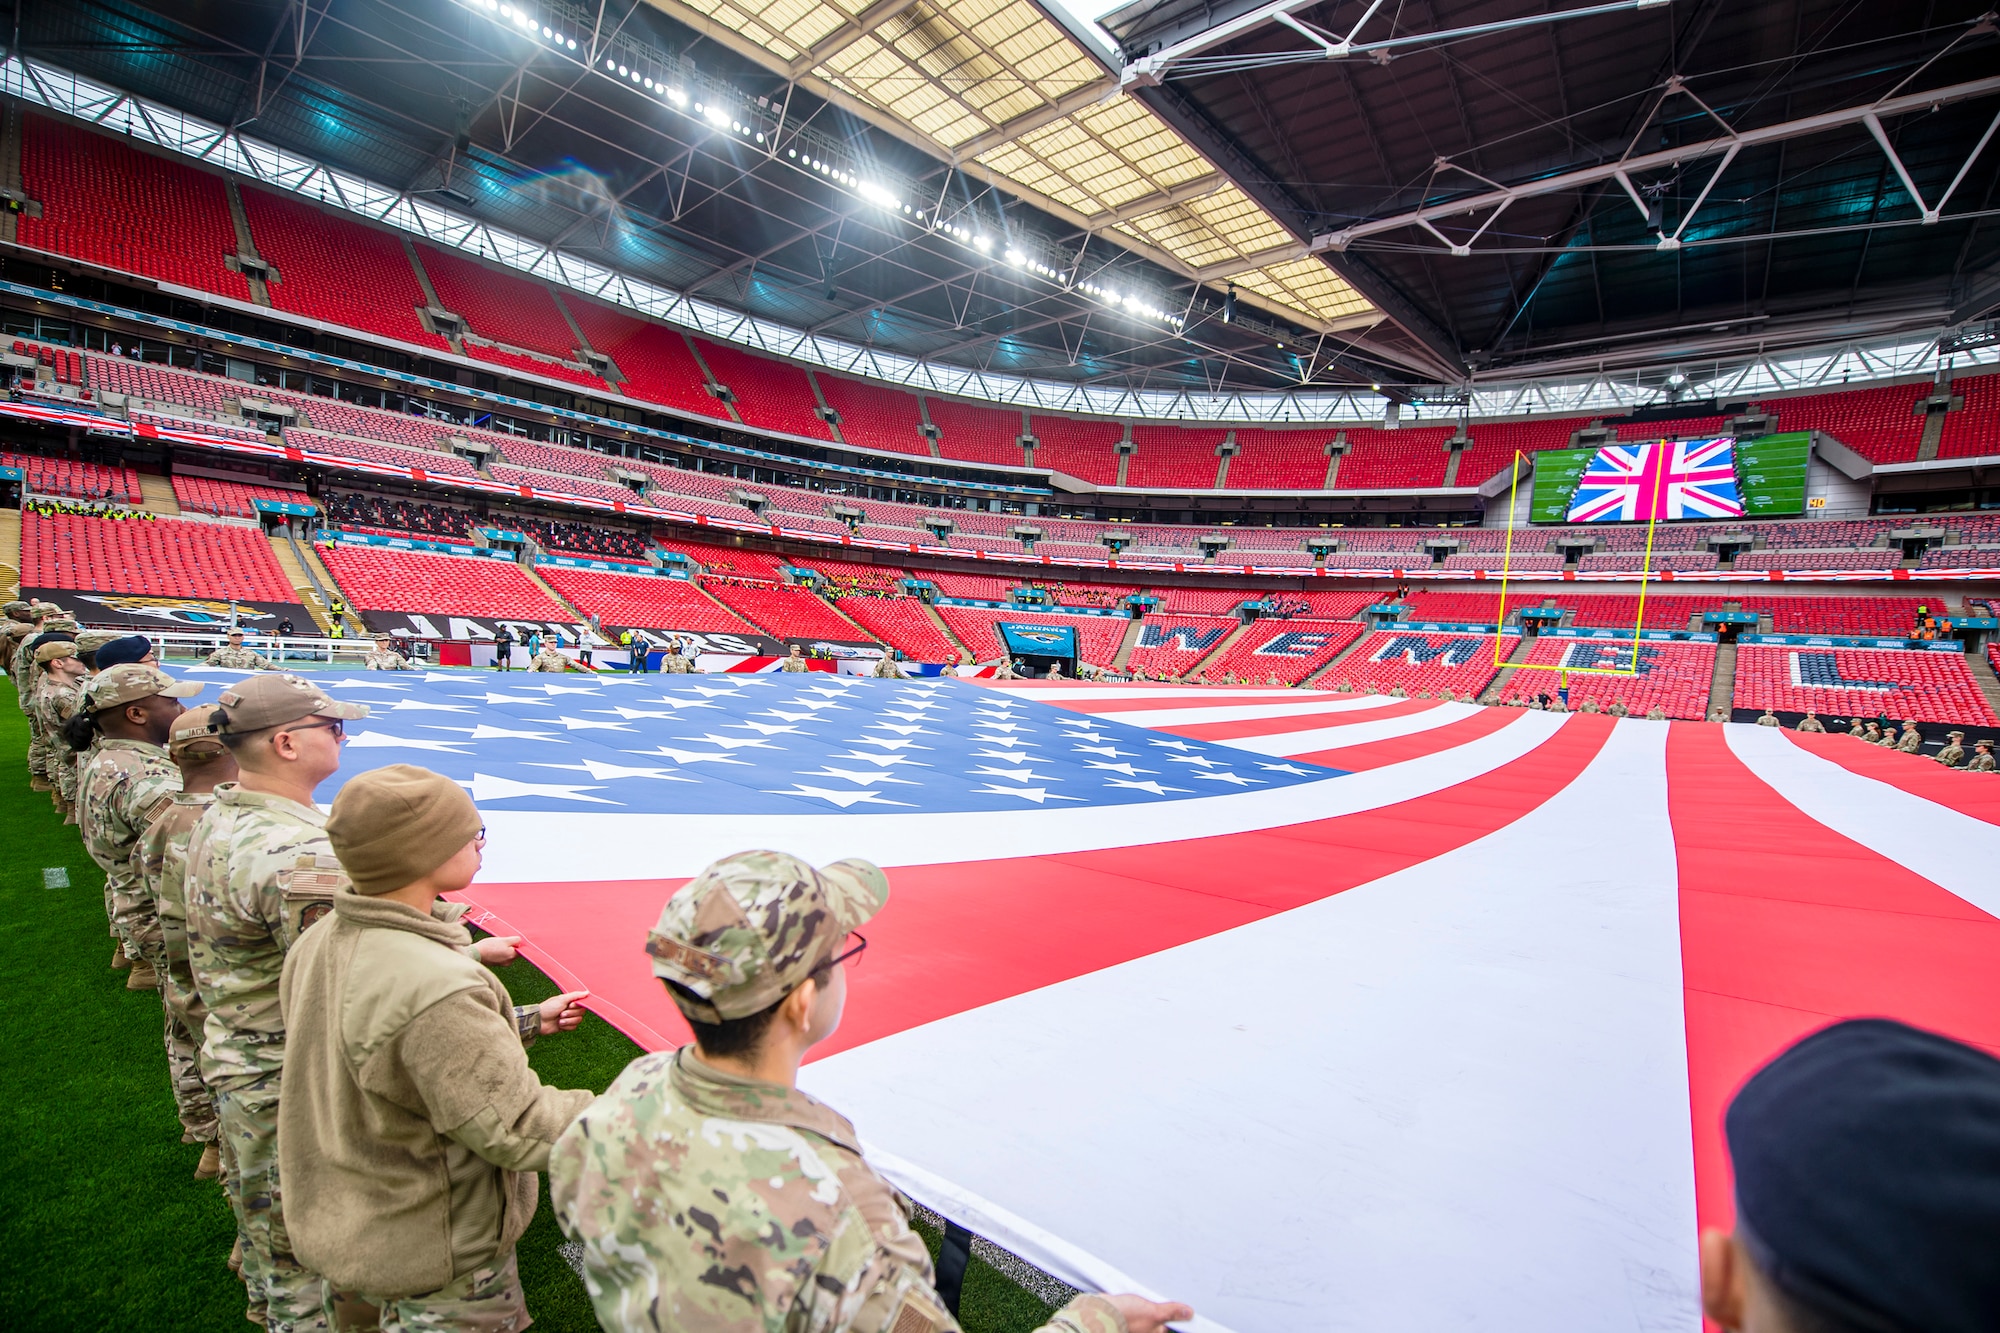 Airmen from the 501st Combat Support Wing rehearse unveiling an American flag at Wembley Stadium, in London, England, Oct. 30, 2022. Approximately 70 uniformed personnel represented the U.S. Air Force and nation by unveiling an American flag during the pre-game ceremonies of the Jacksonville Jaguars and Denver Broncos NFL game. (U.S. Air Force photo by Staff Sgt. Eugene Oliver)